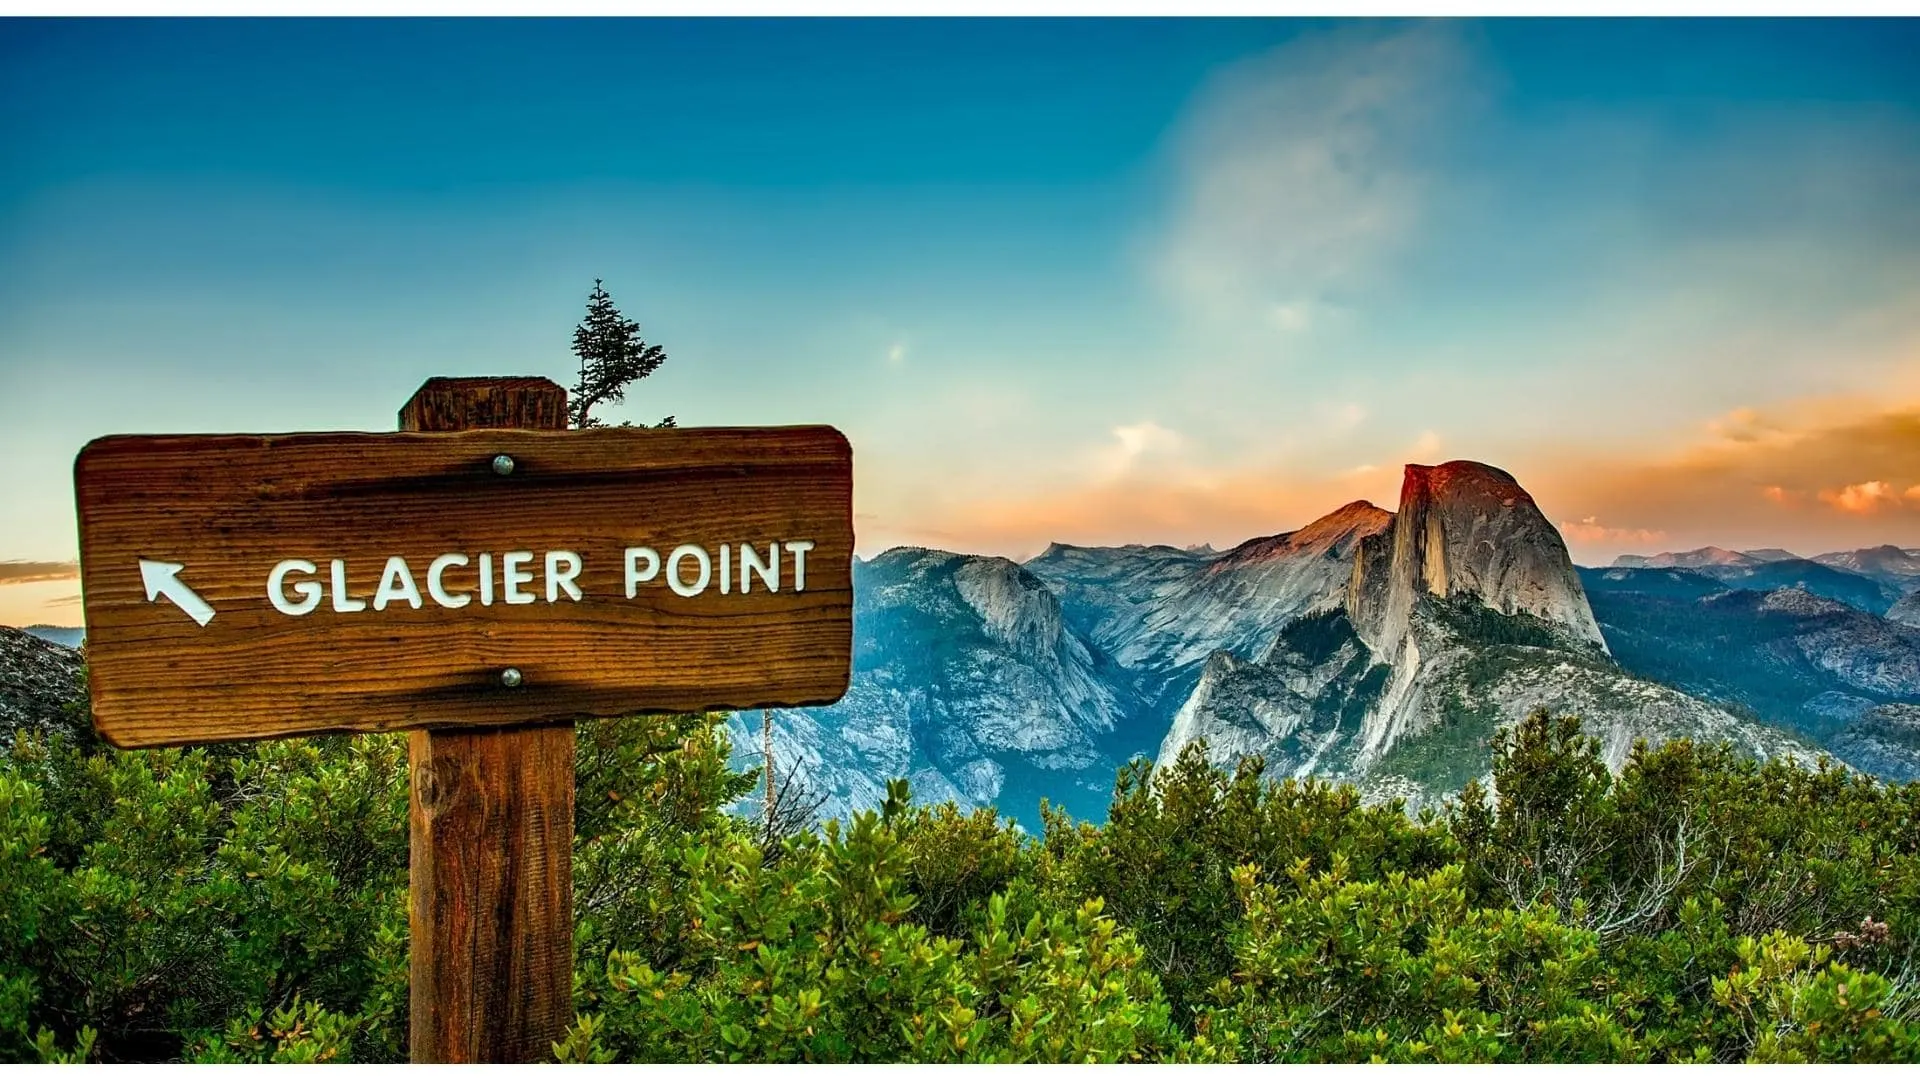 Places like Glacier Point are the reason you want to spend time RV camping in Yosemite